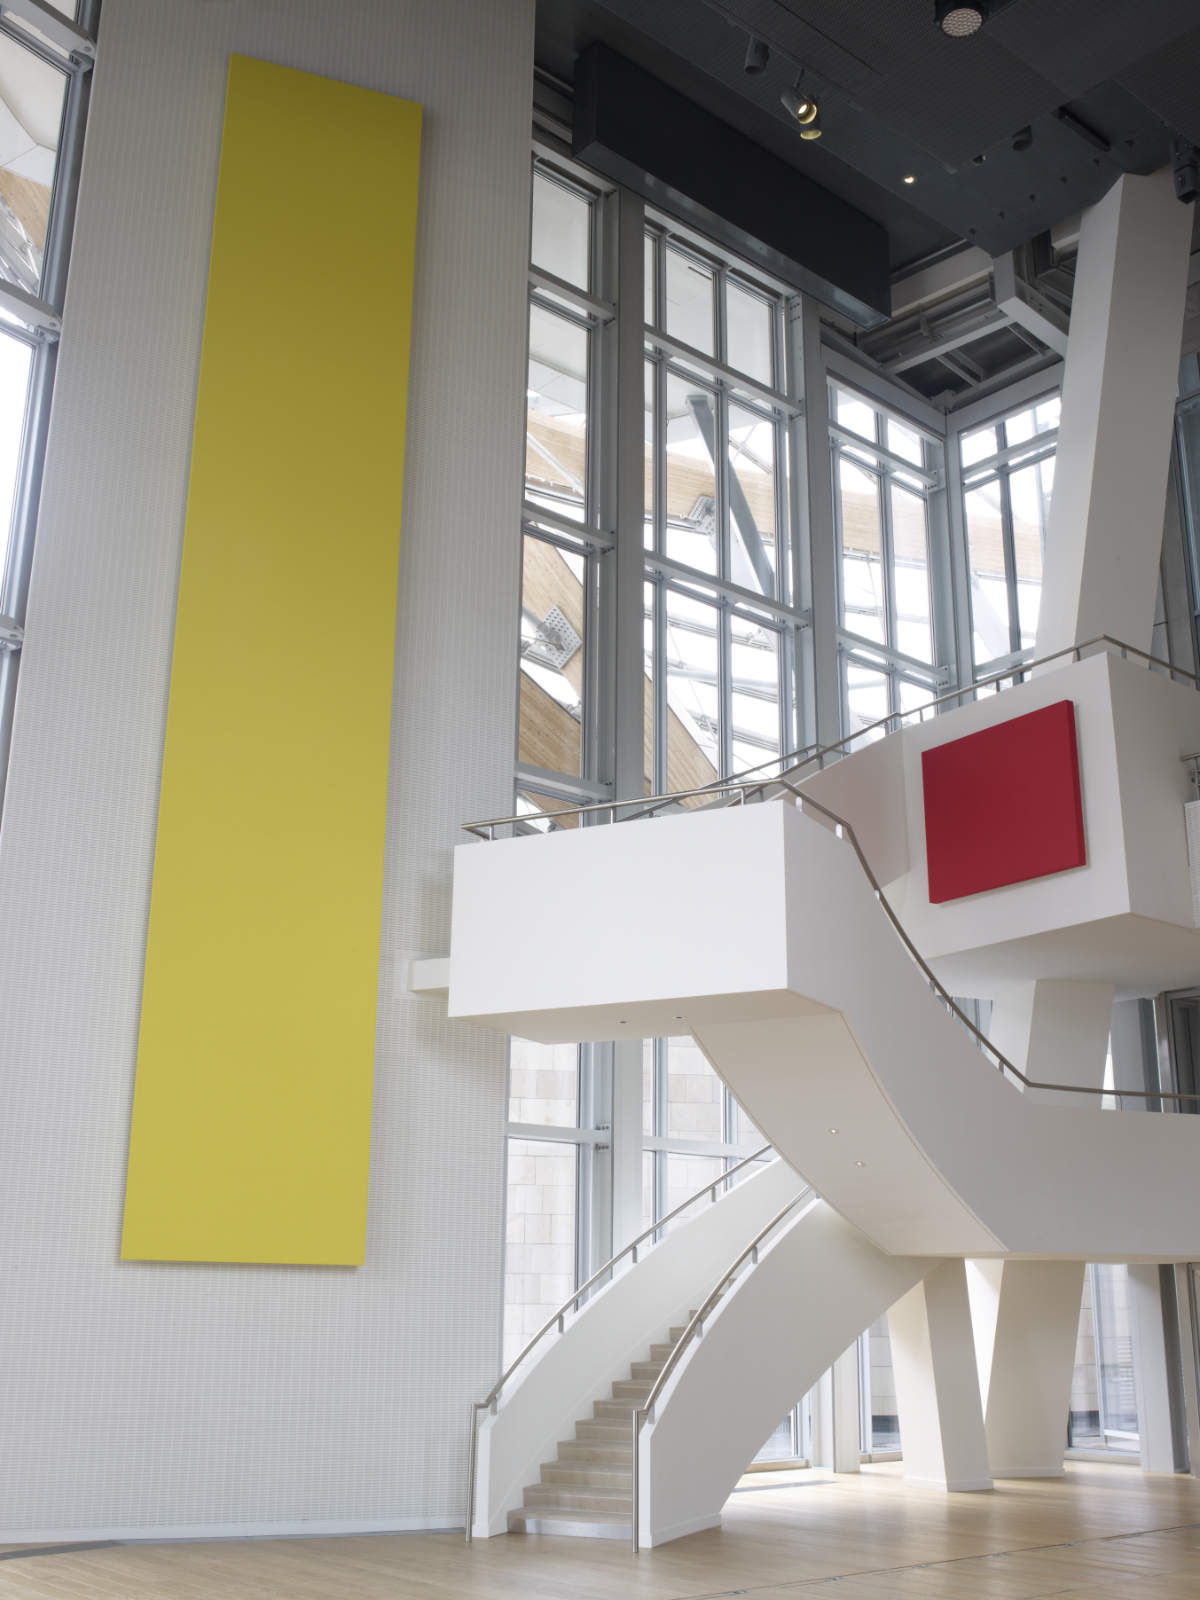 Fondation Louis Vuitton: The Red Studio By Mattise & Shapes And Colours By Kelly